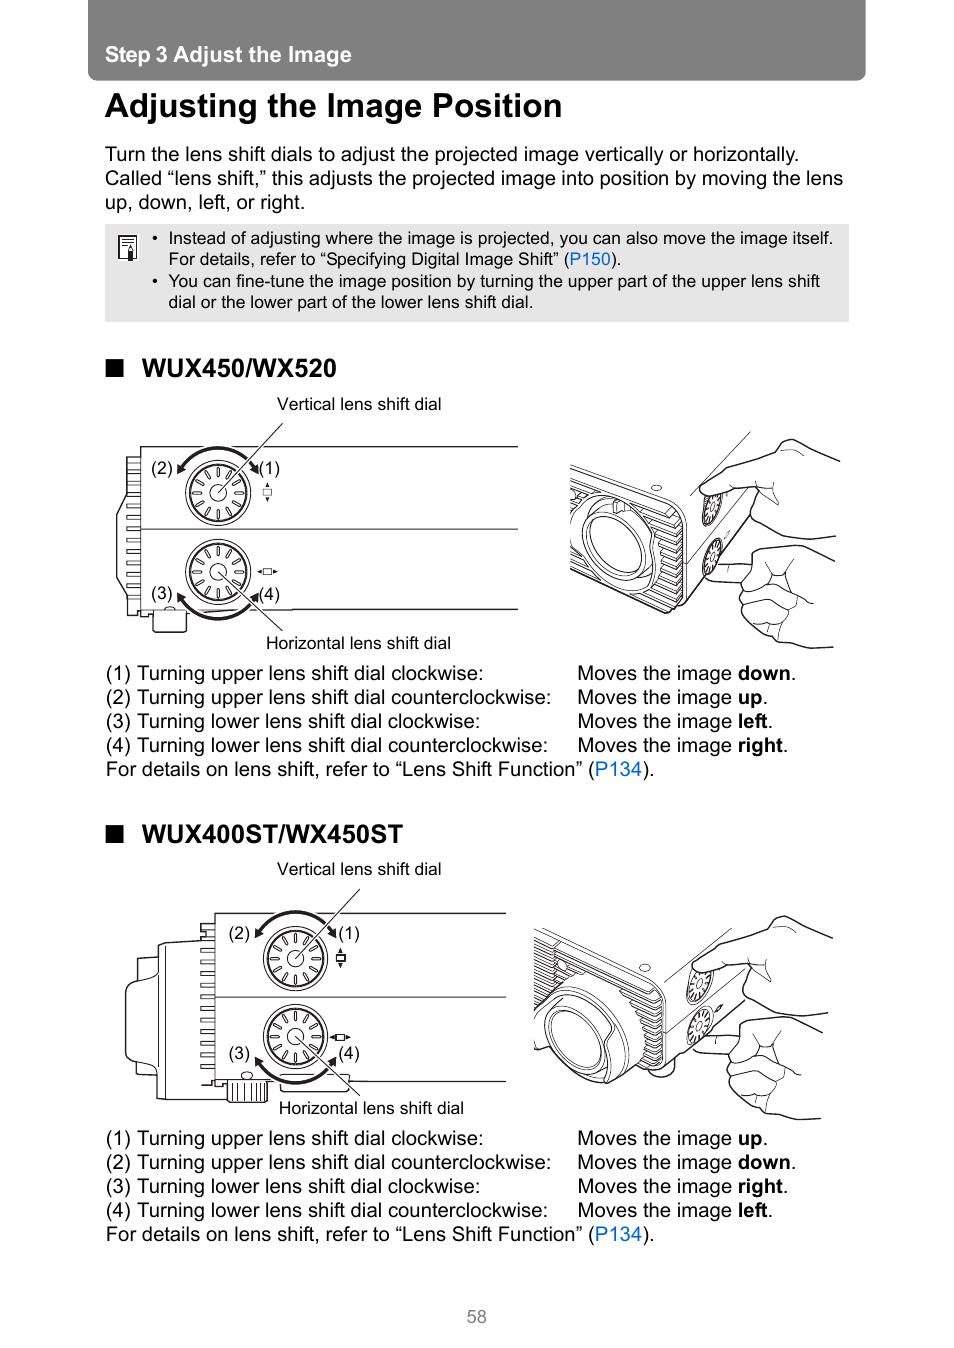 Adjusting the image position, Wux450/wx520, Wux400st/wx450st | Canon XEED WUX450 User Manual | Page 58 / 314